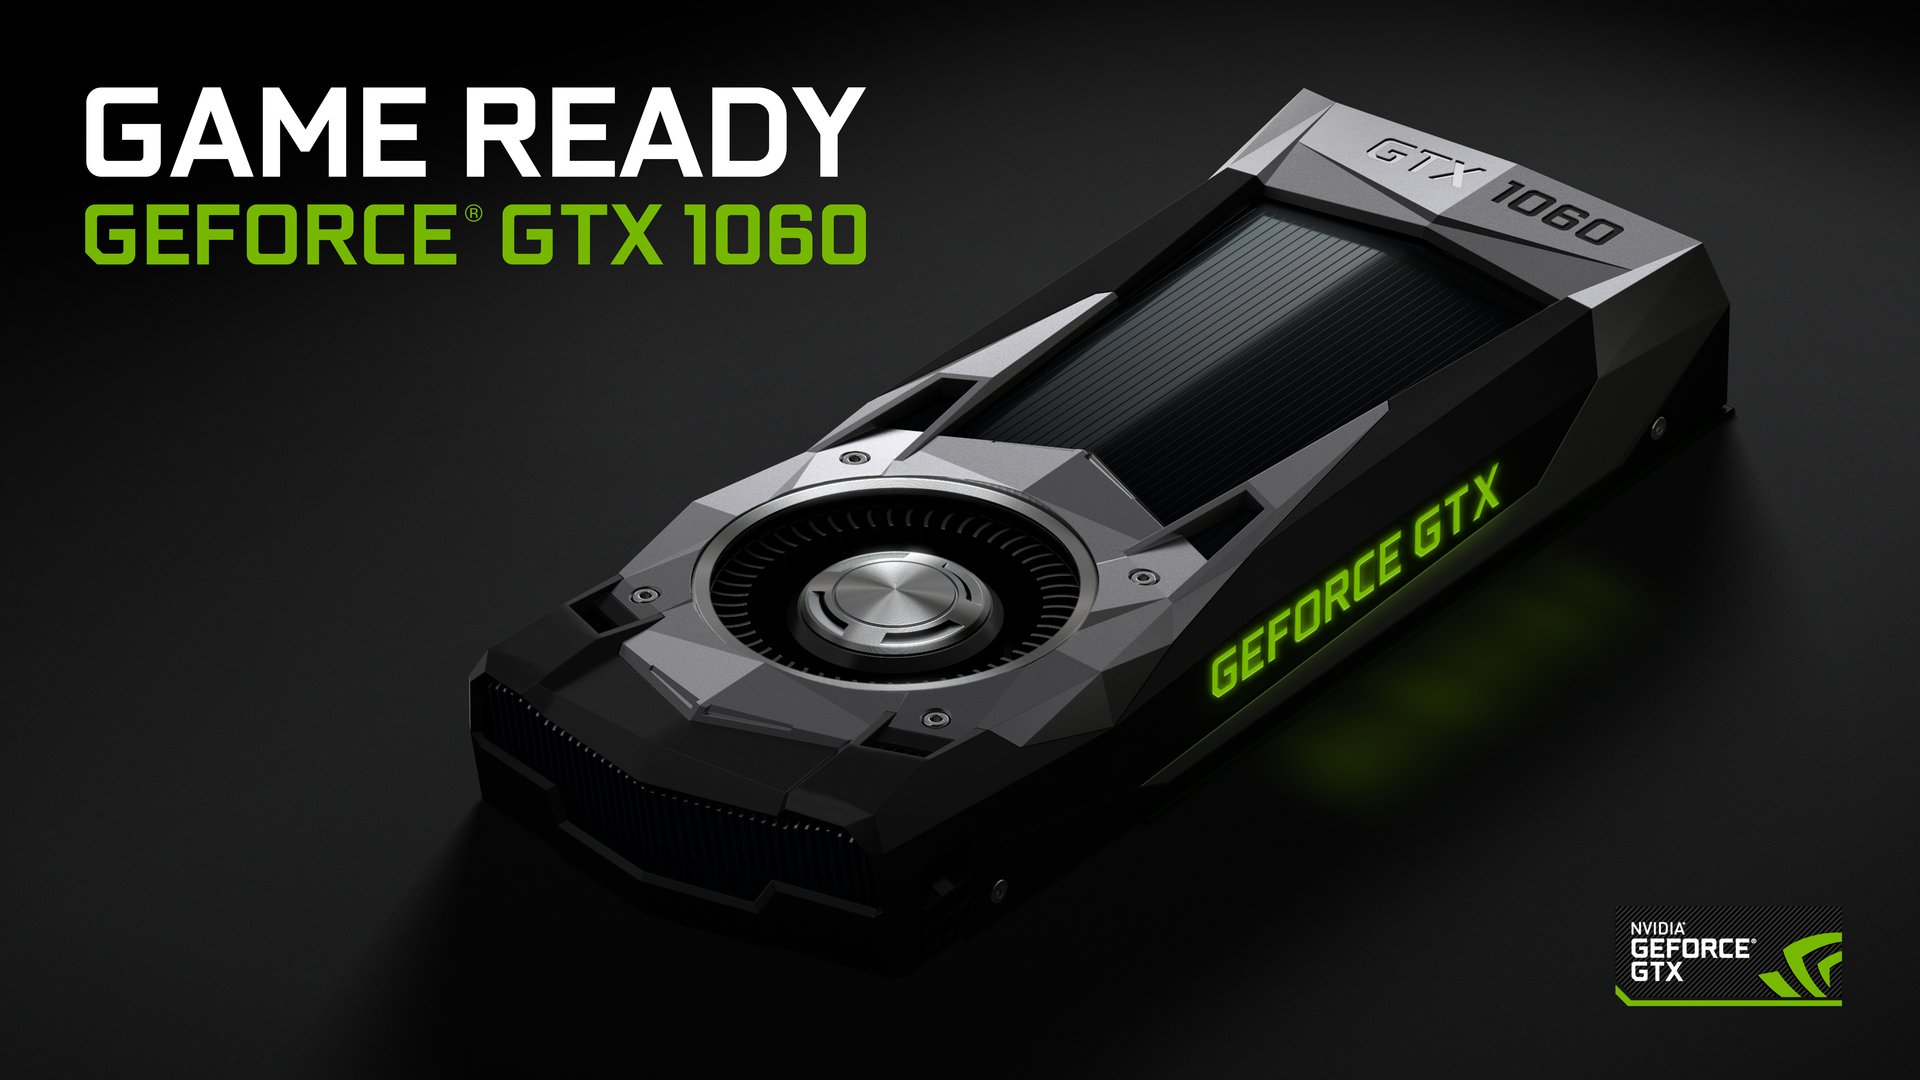 NVIDIA GeForce GeForce GTX 1060. Perf of GTX starting at $249. A quantum leap for every gamer